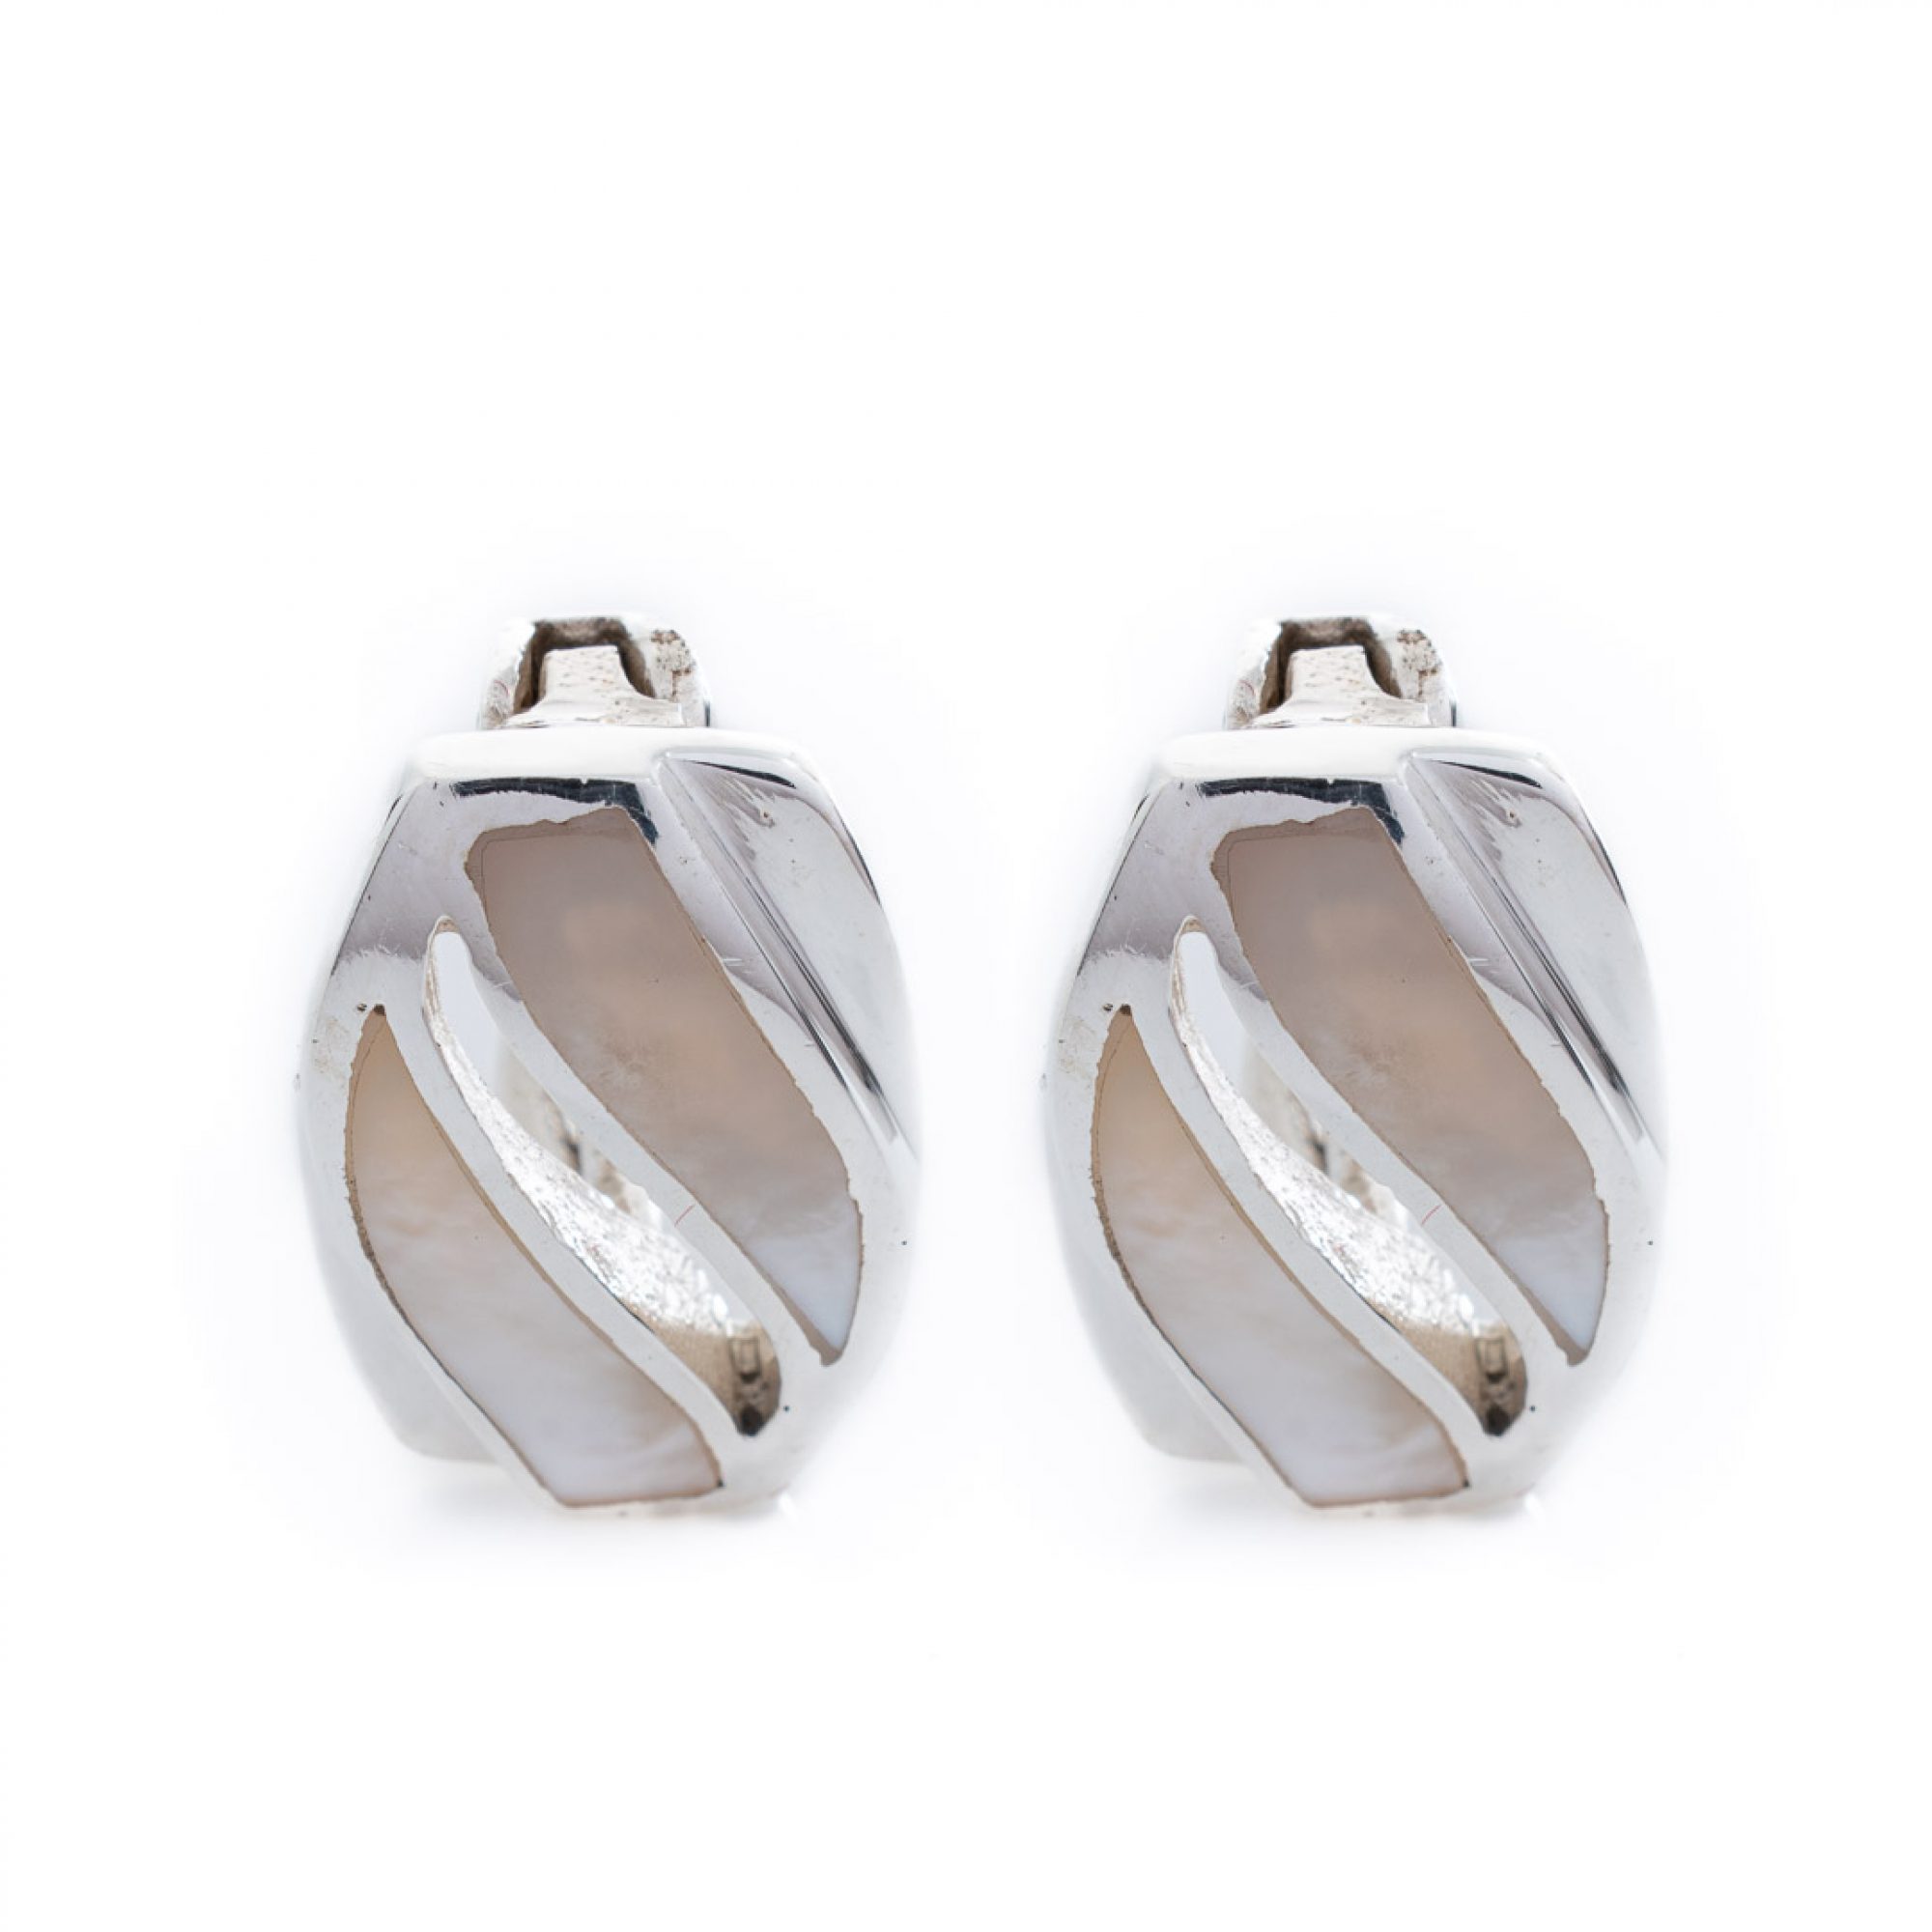 Silver stud earrings with mother of pearl